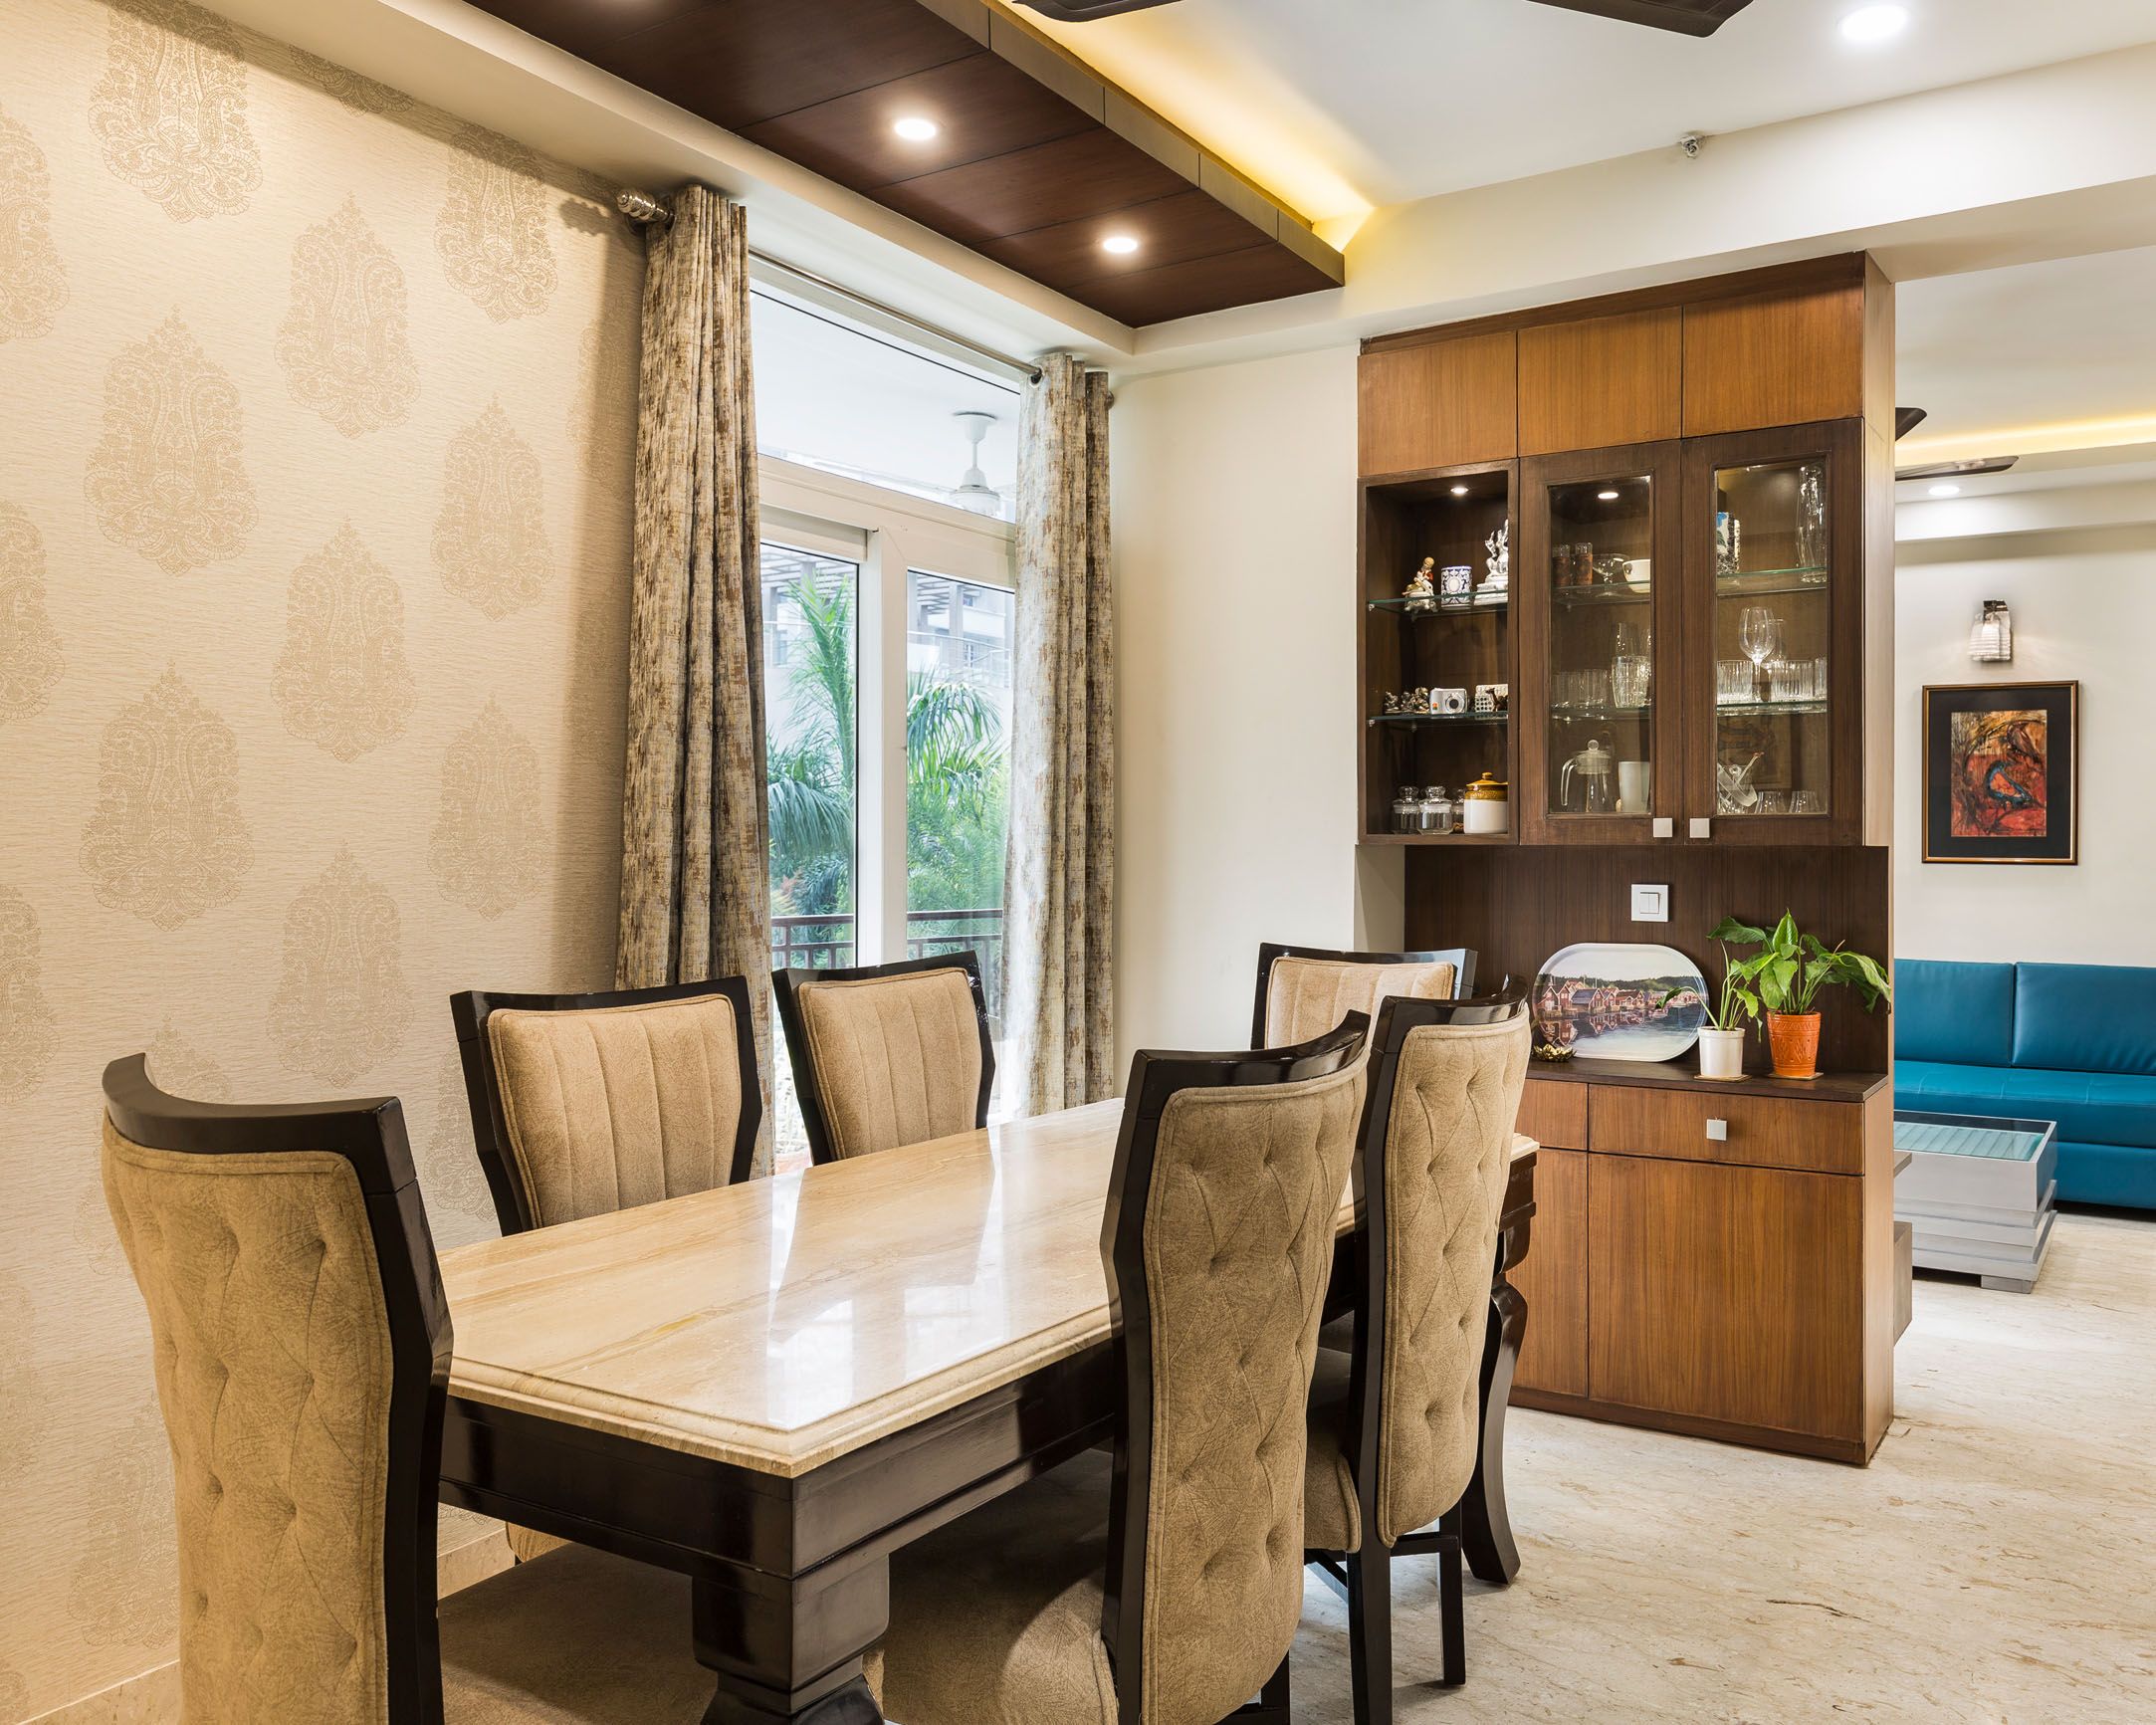 Modern Beige 6-Seater Dining Room Design With Wooden Crockery Unit